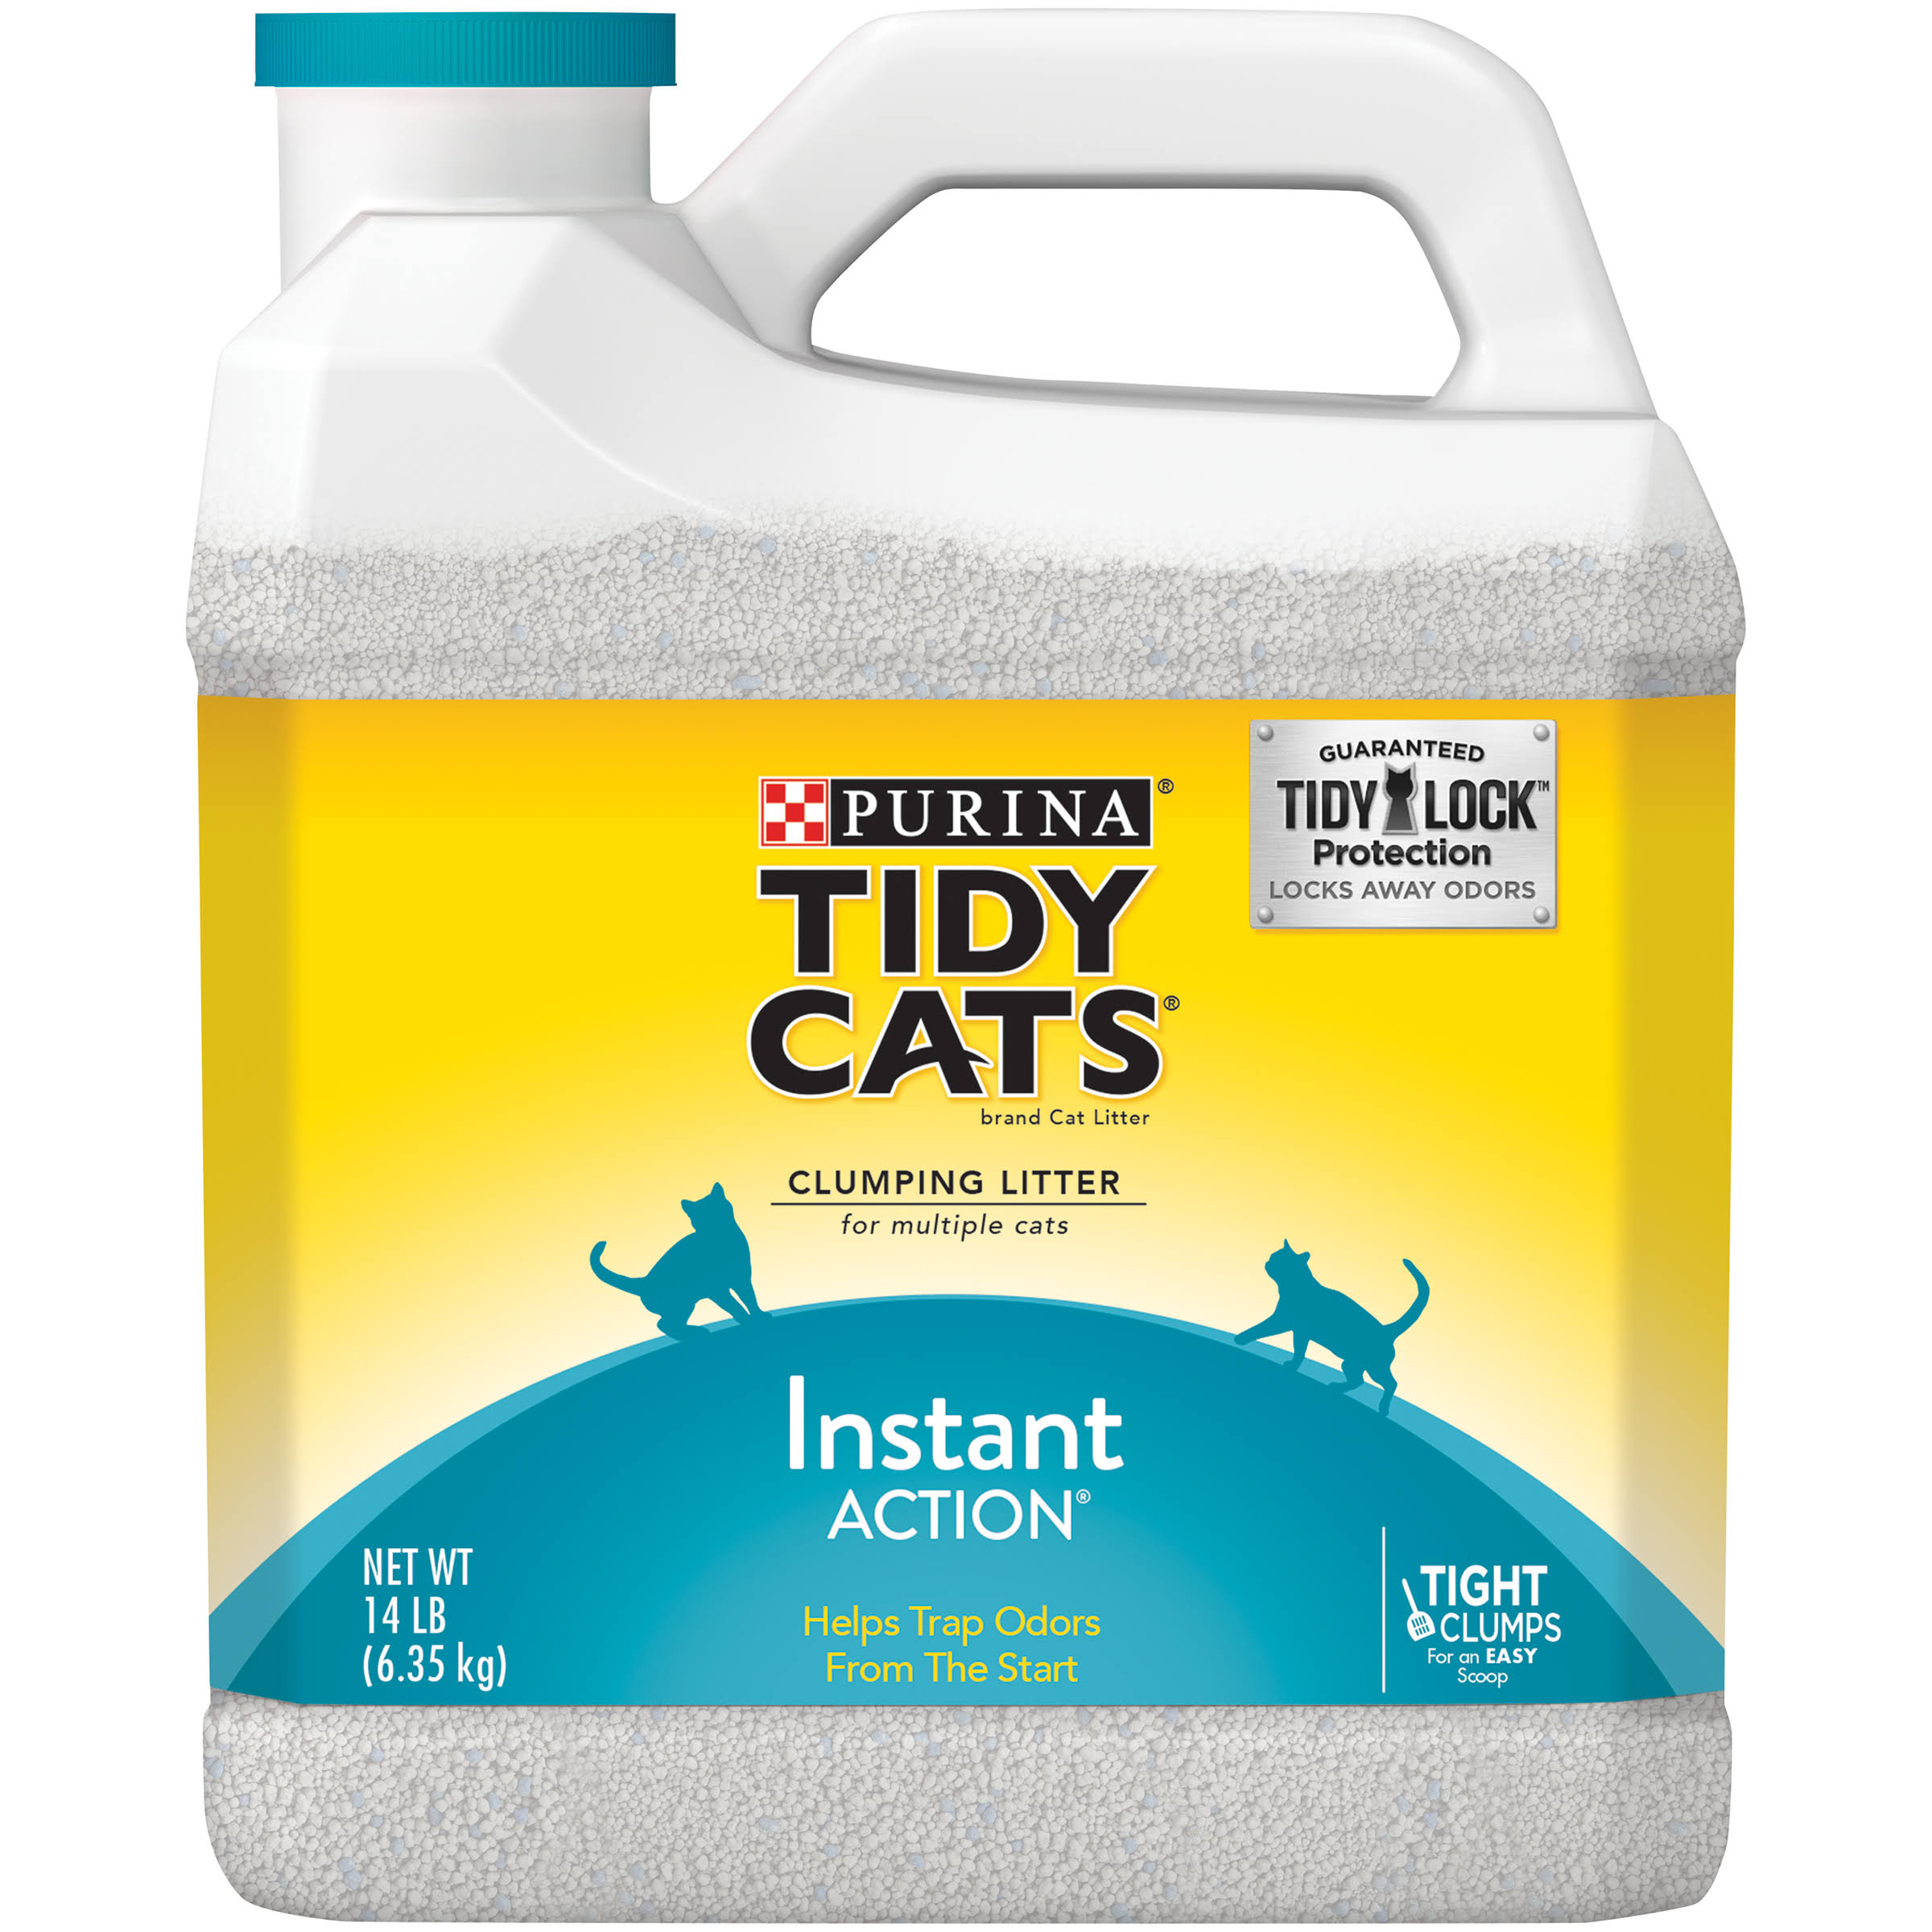 Purina Tidy Cats Clumping Litter Instant Action - 14lb